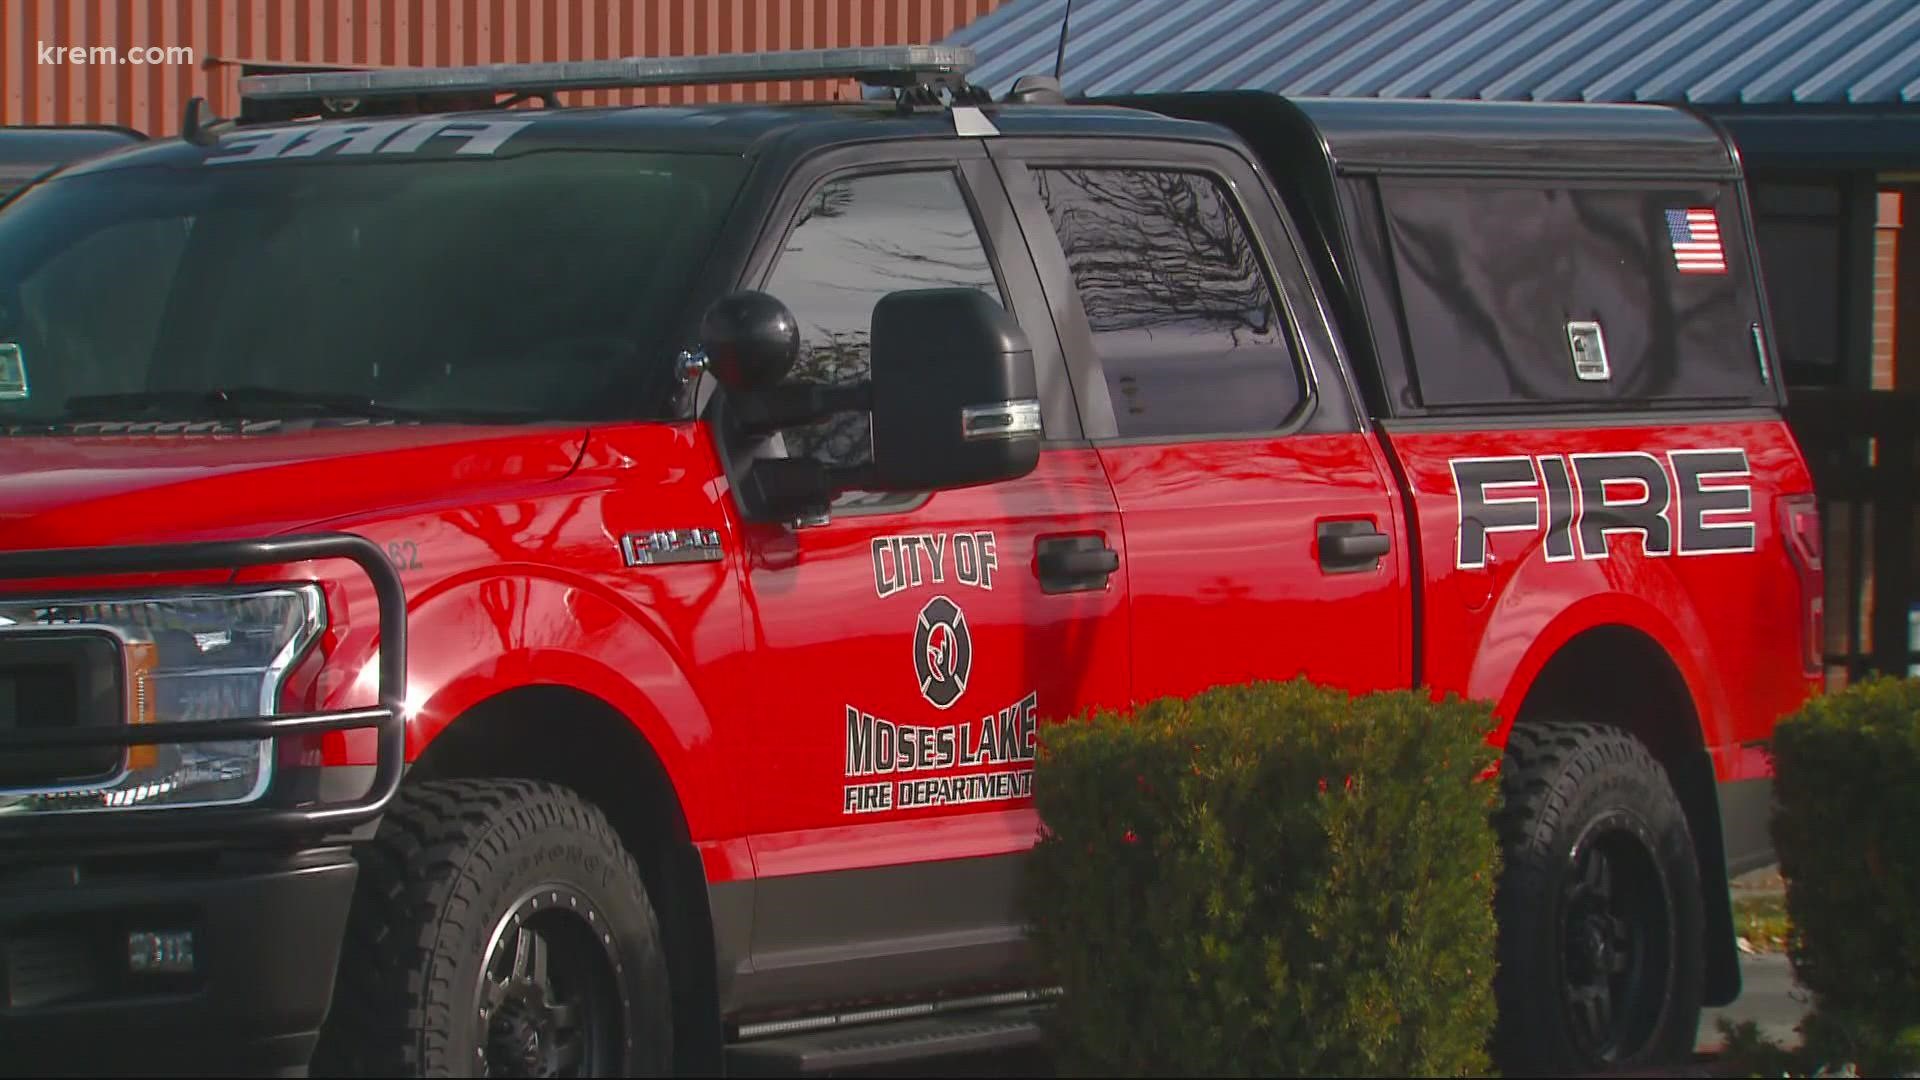 The fire department lost three firefighters after the Oct. 18 deadline. At the time, the city said it could not offer any accommodations.